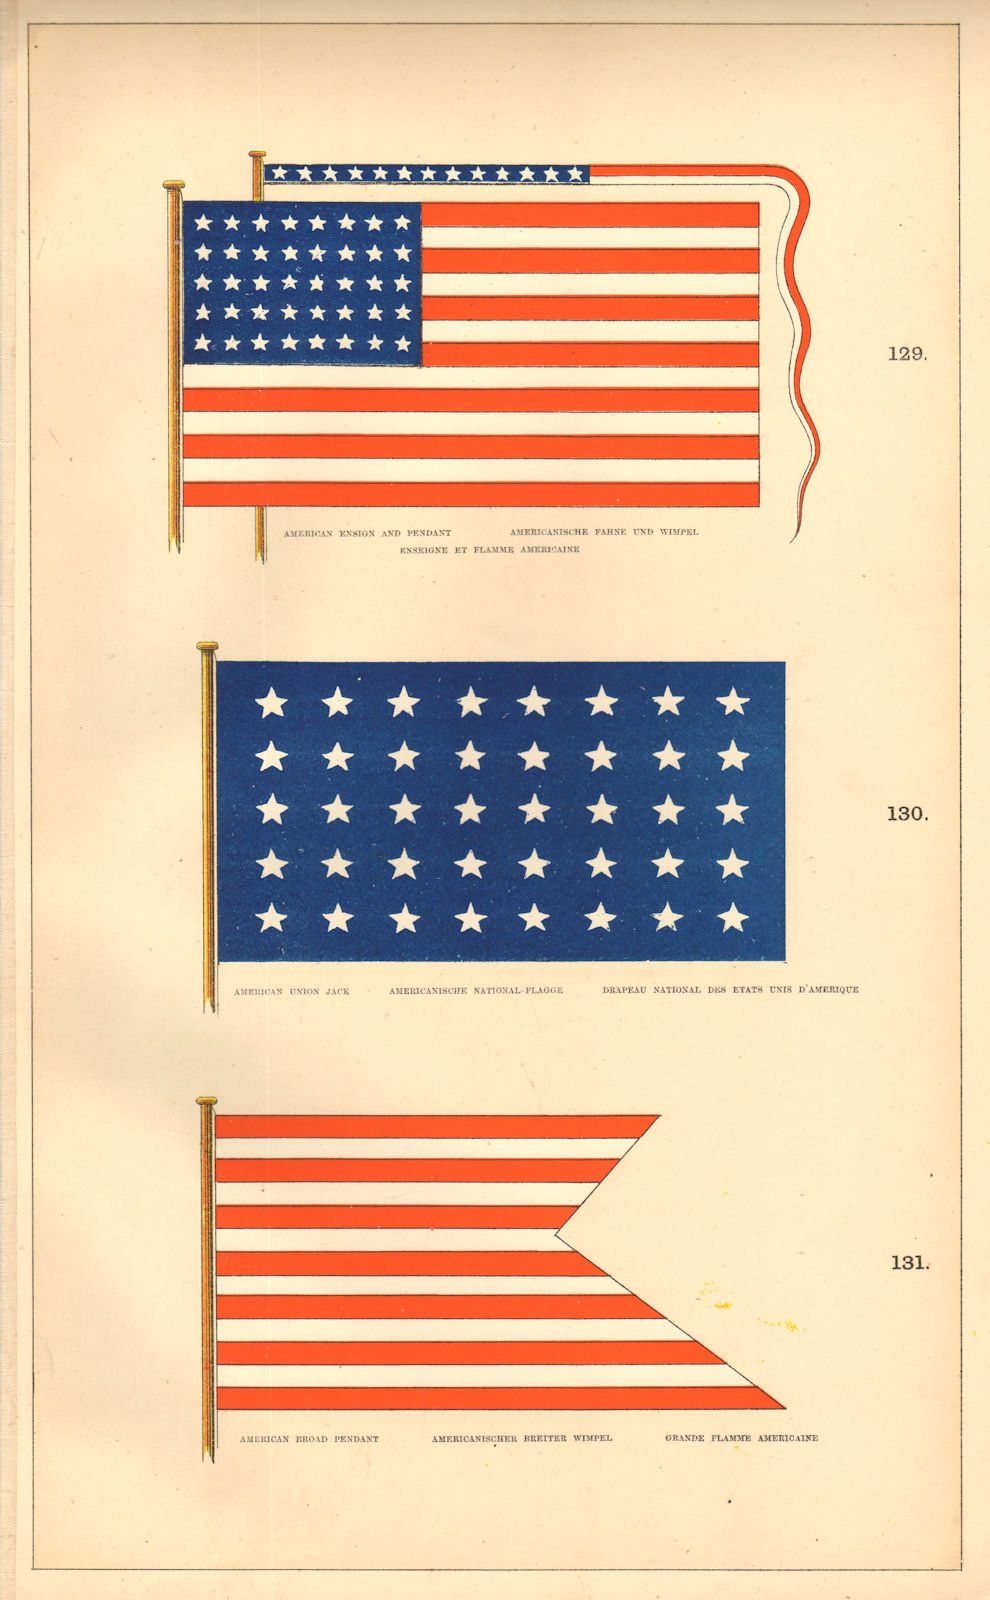 USA MARITIME/NATIONAL FLAGS. American Ensign broad pennant Union Jack 1873